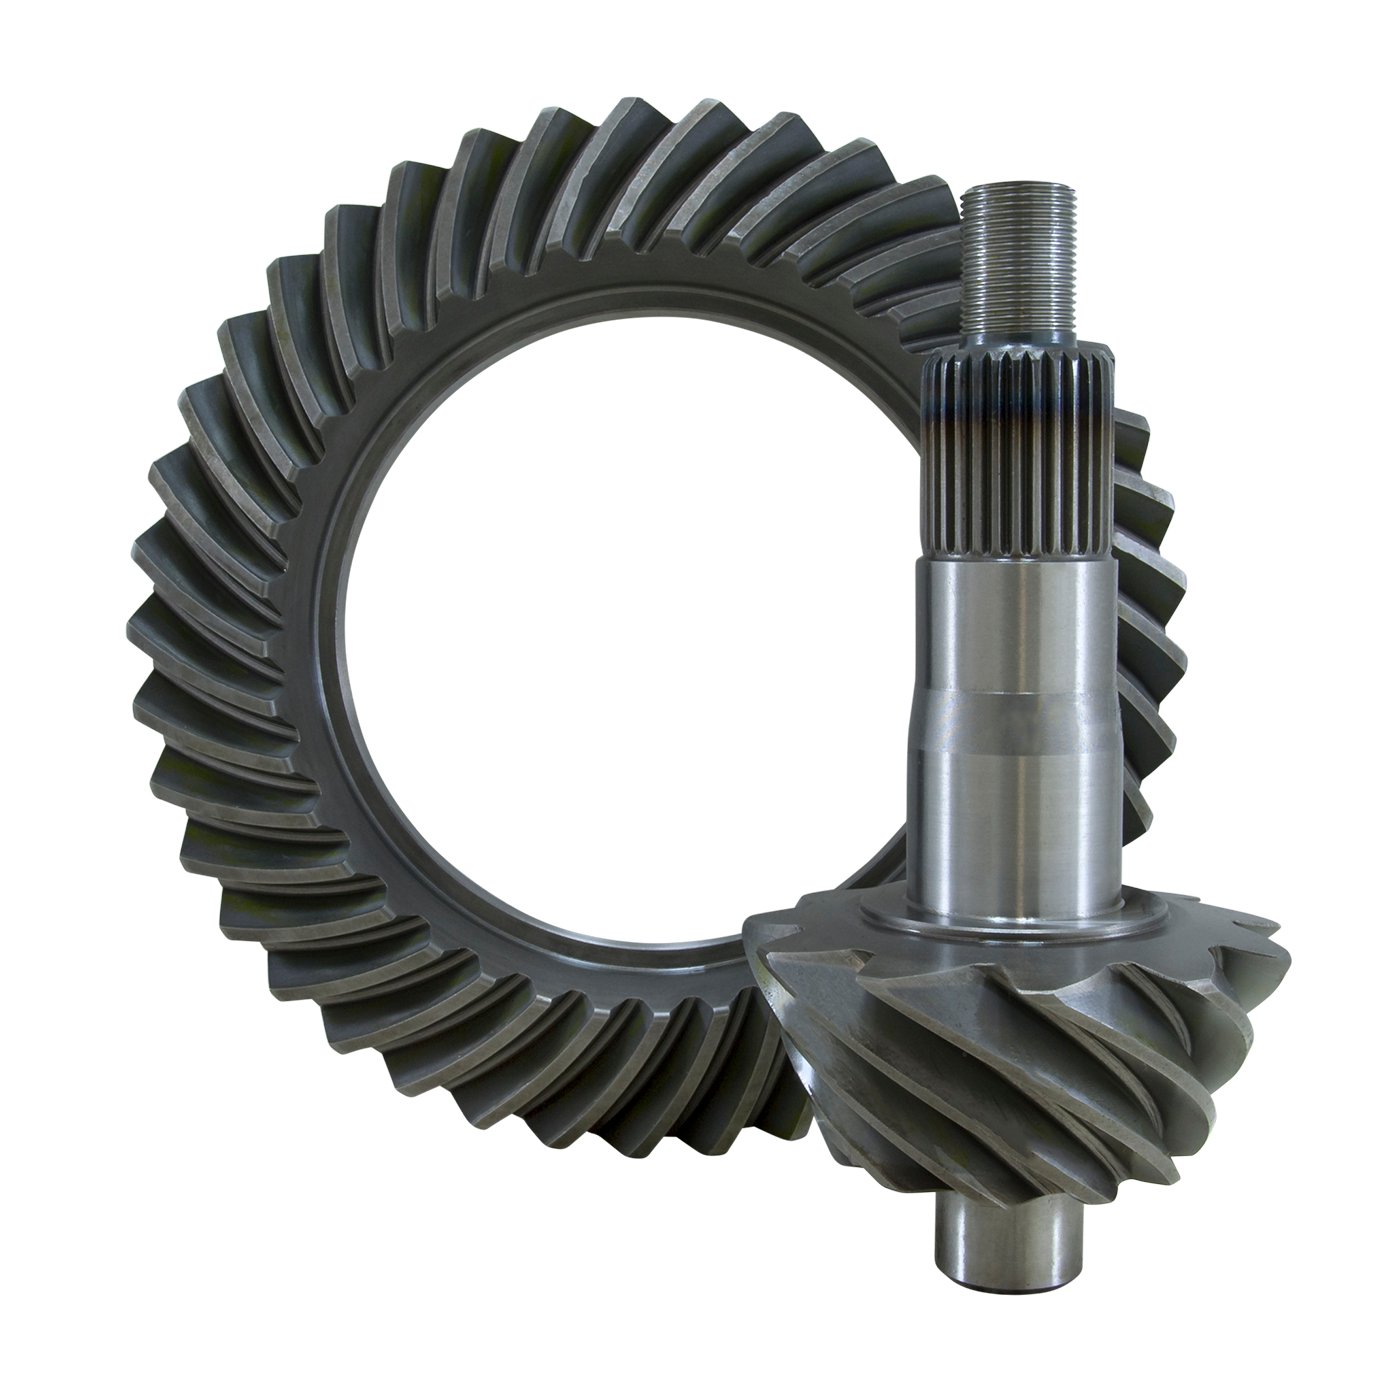 USA Standard 36186 Ring & Pinion Set, For 10.5 in. GM 14 Bolt Truck, 4.88 Ratio, Thick